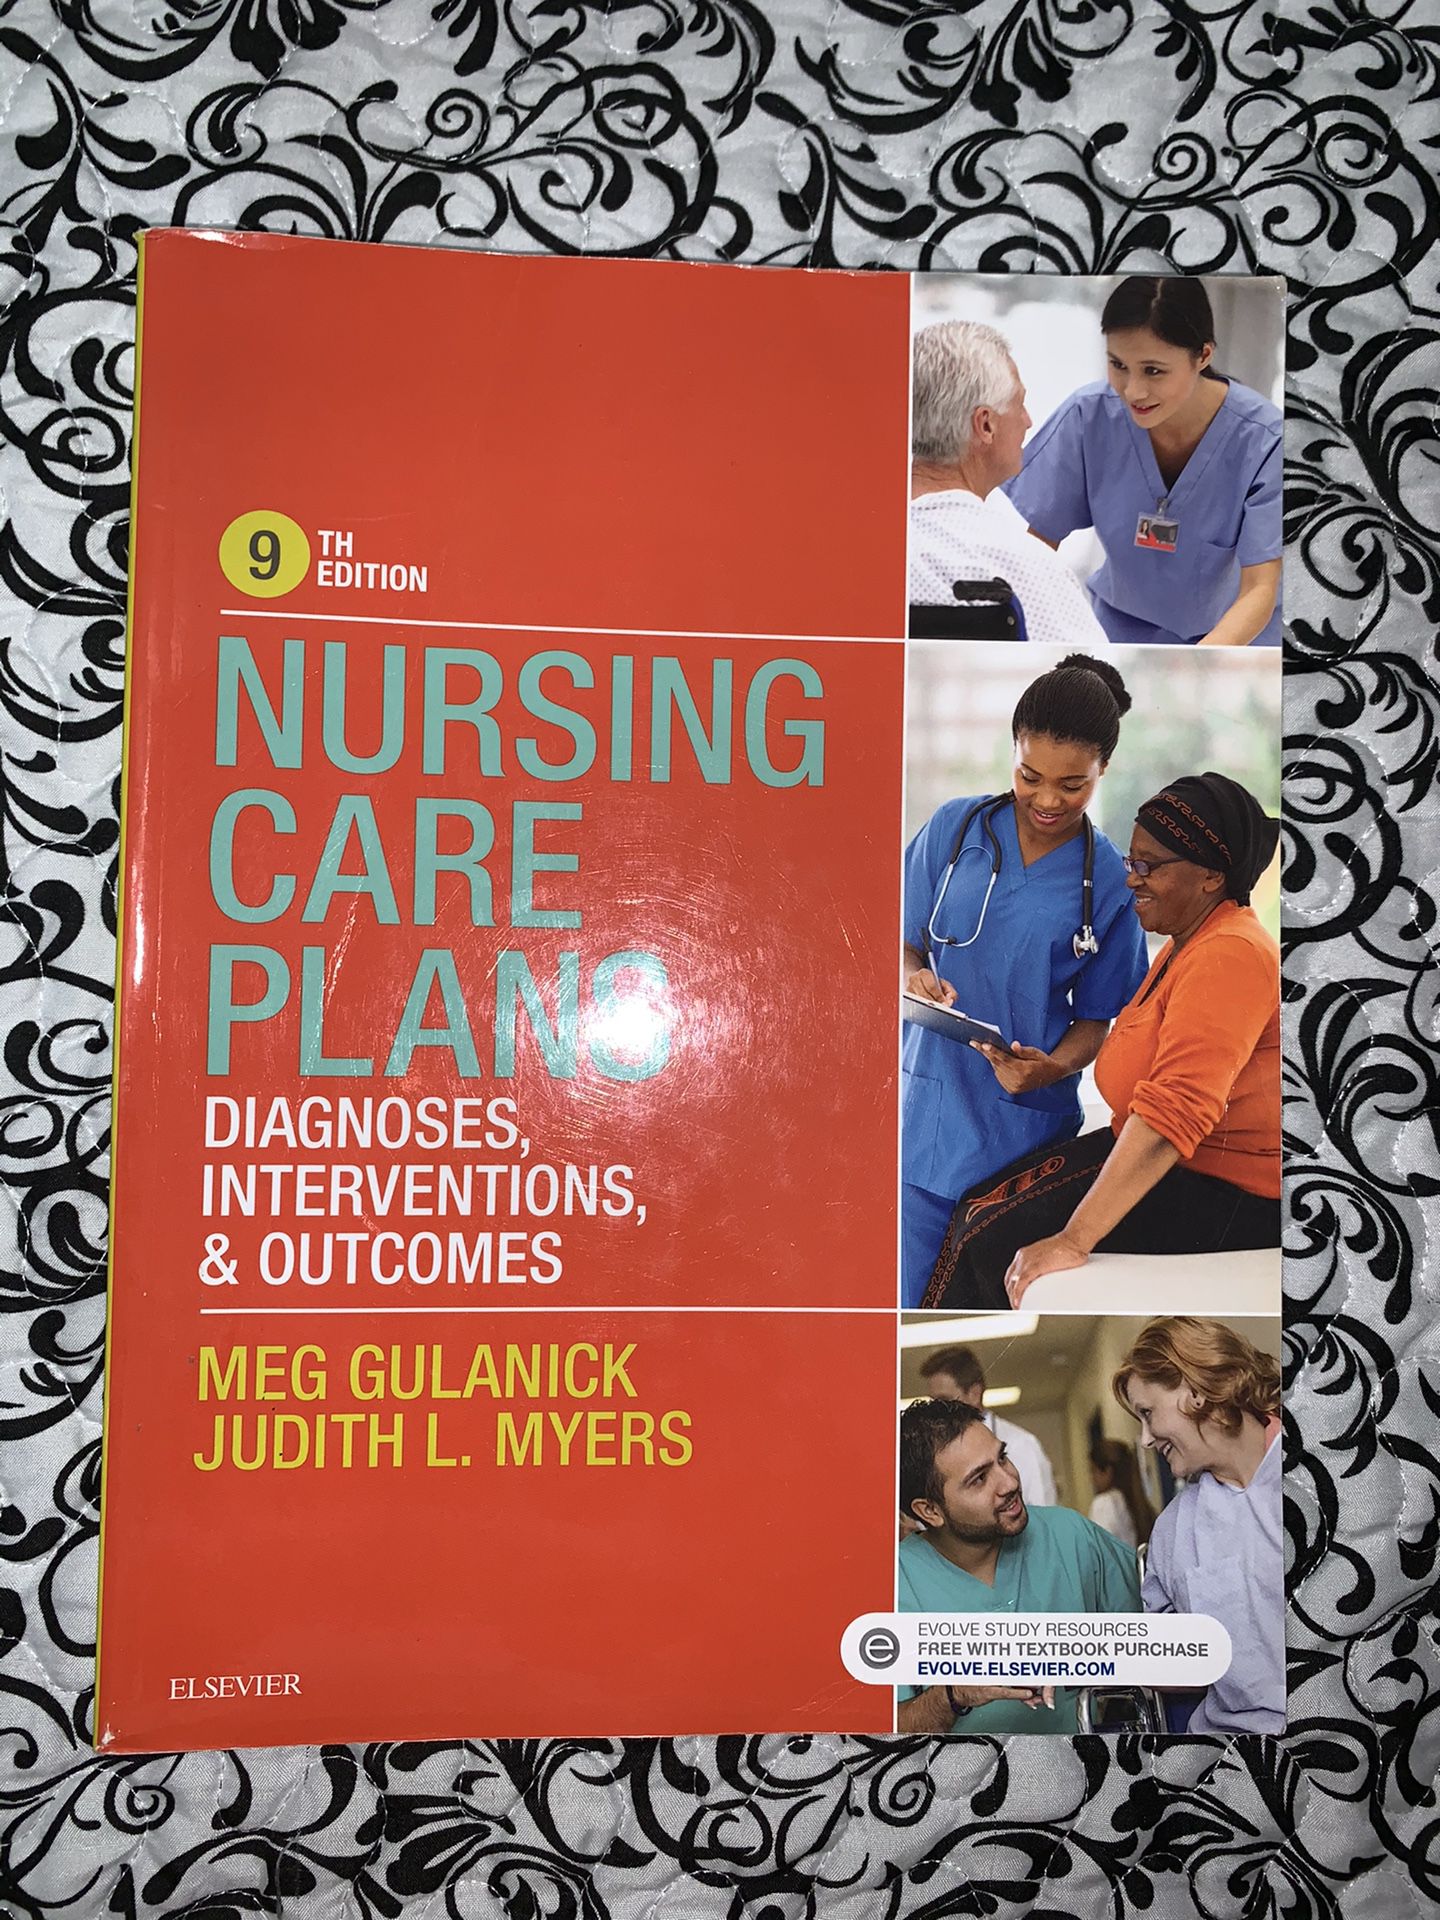 Nursing Care Plans: Diagnoses, Interventions and Outcomes